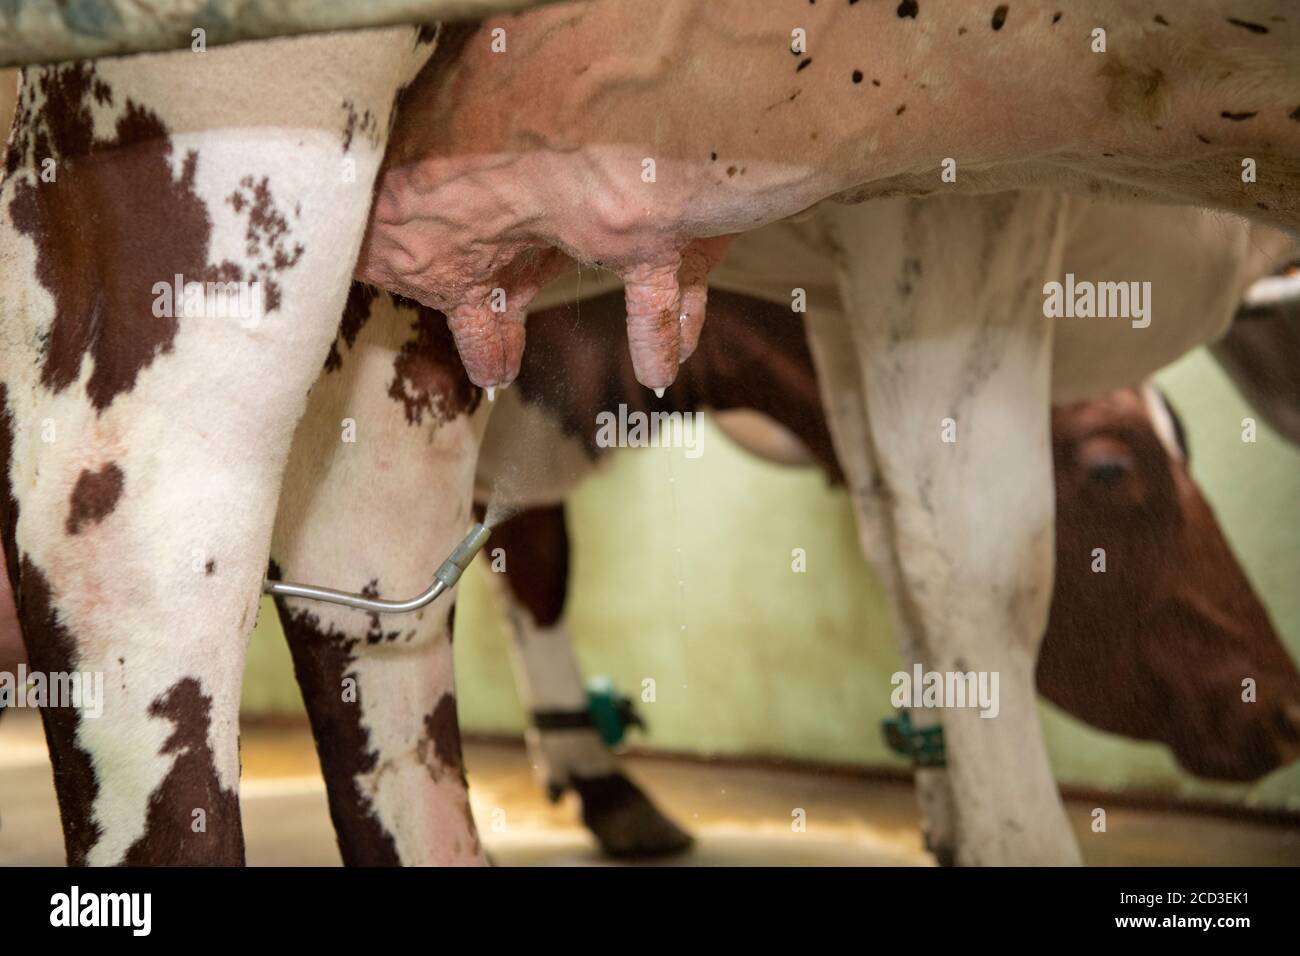 Dairy Farmer Cleaning Milking Parlour High Resolution Stock Photography And Images Alamy